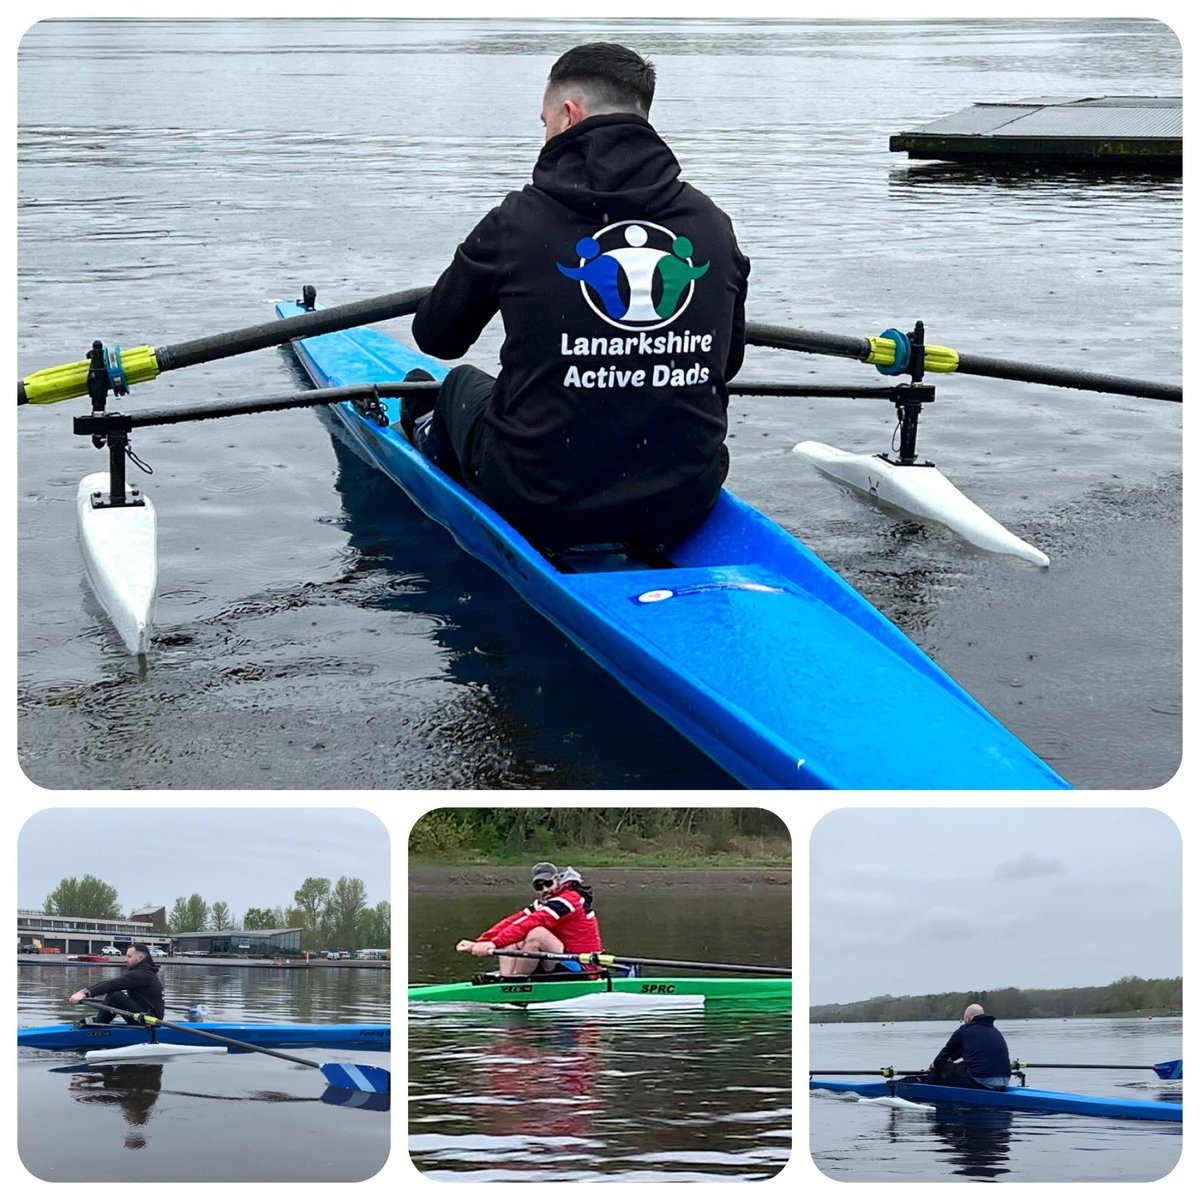 Back on the water this morning #CommunityRowing with some of the Lanarkshire Active Dads group. Great to start this block of sessions with some flat water - looking forward to seeing where we can get to in the coming weeks @SP_RC1 @ScottishRowing @active_nl @FoundationScot